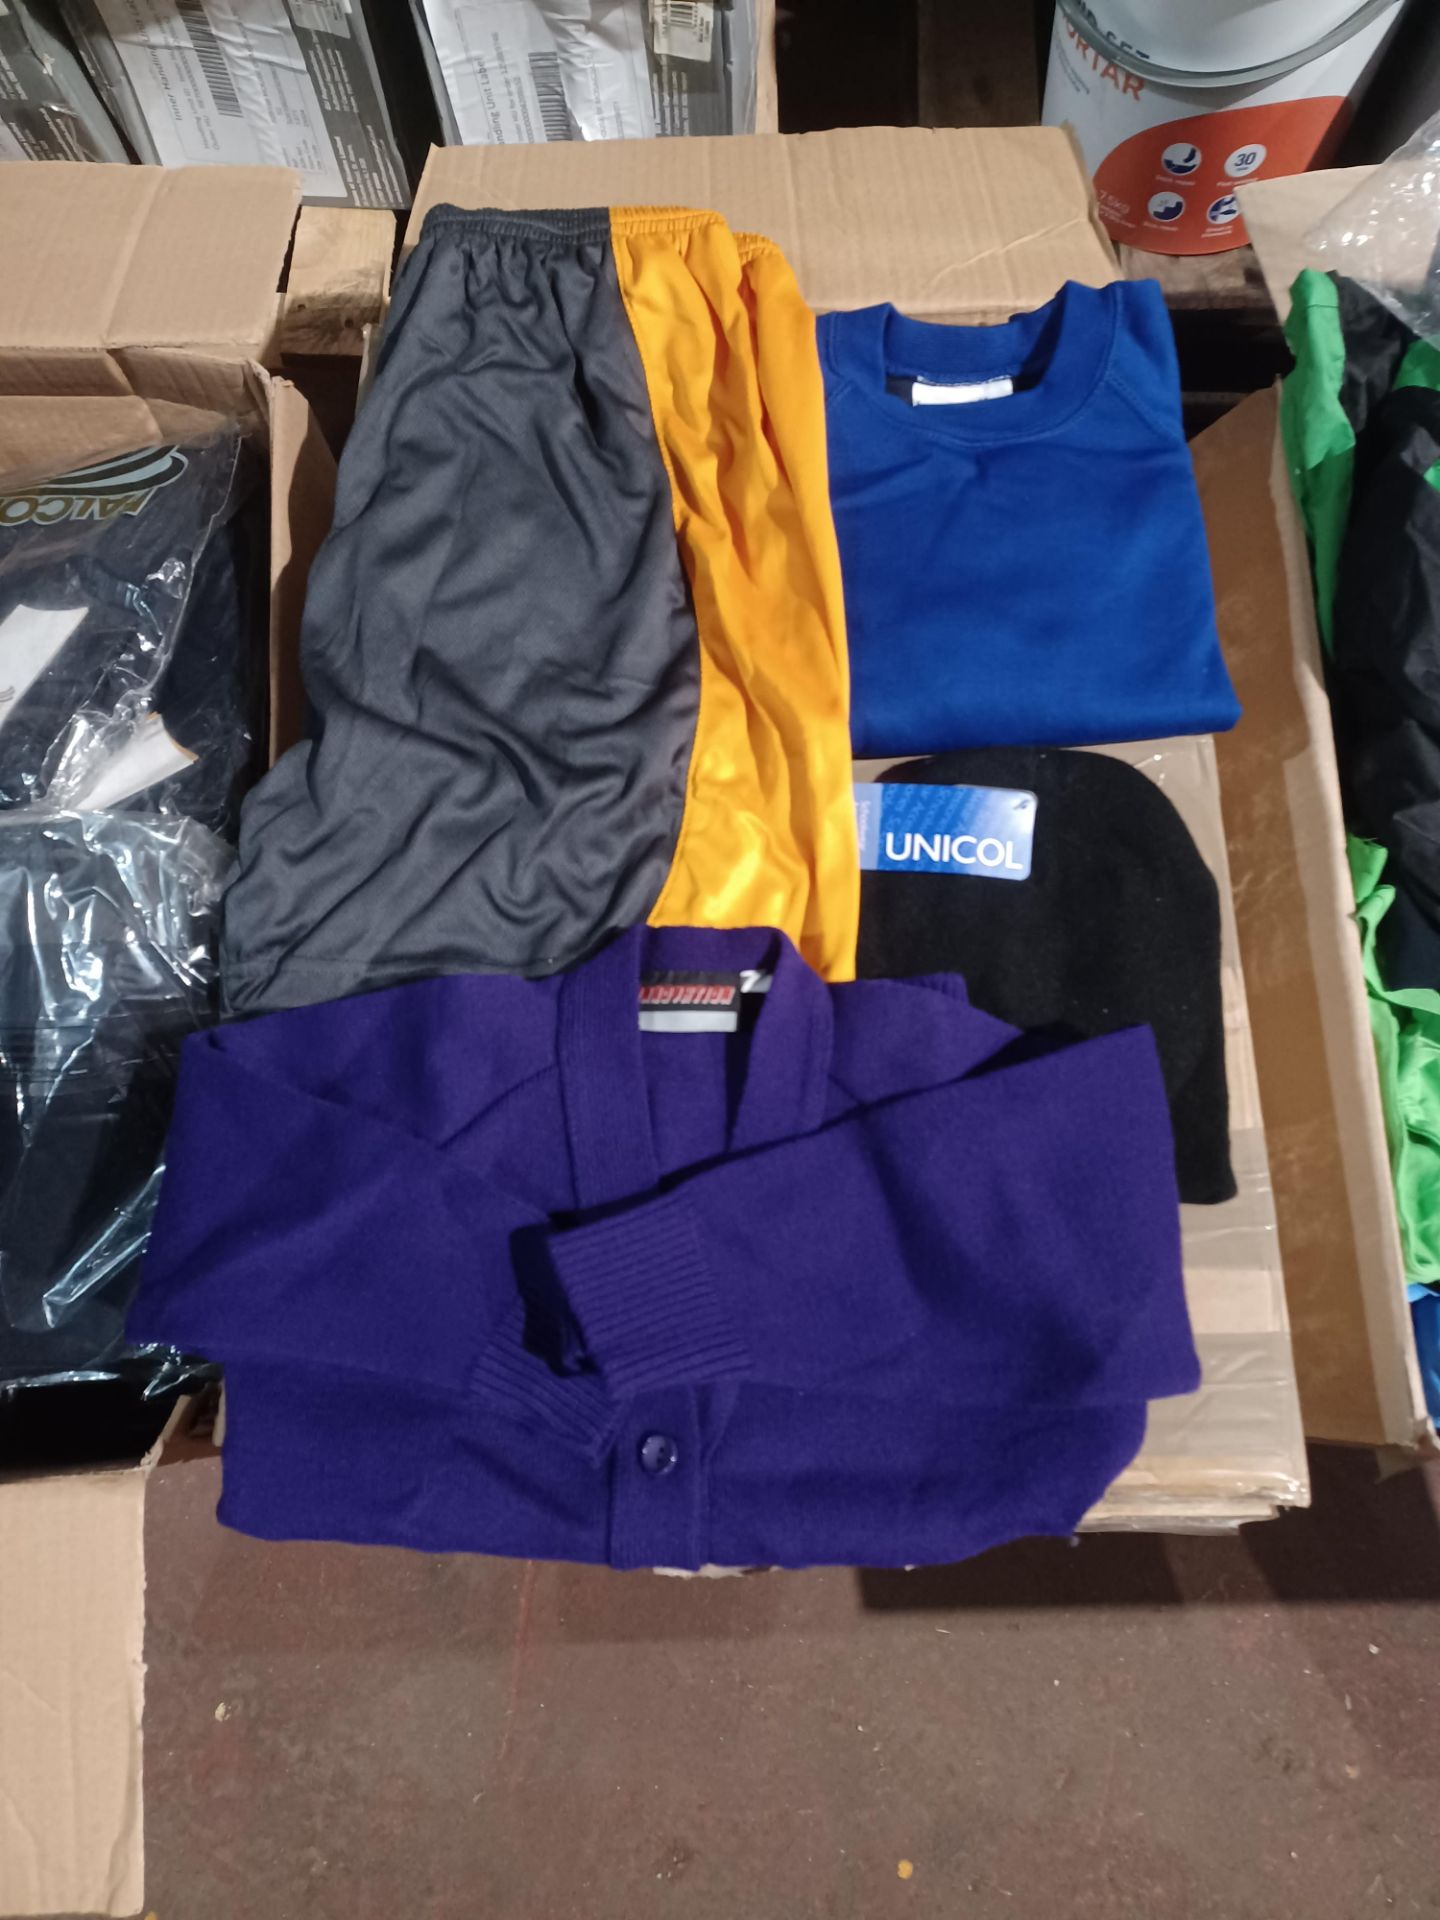 40 x Mixed Piece Clothing lot; to include Swim Trunks, Hats, Jackets, Shorts and much more. - R14